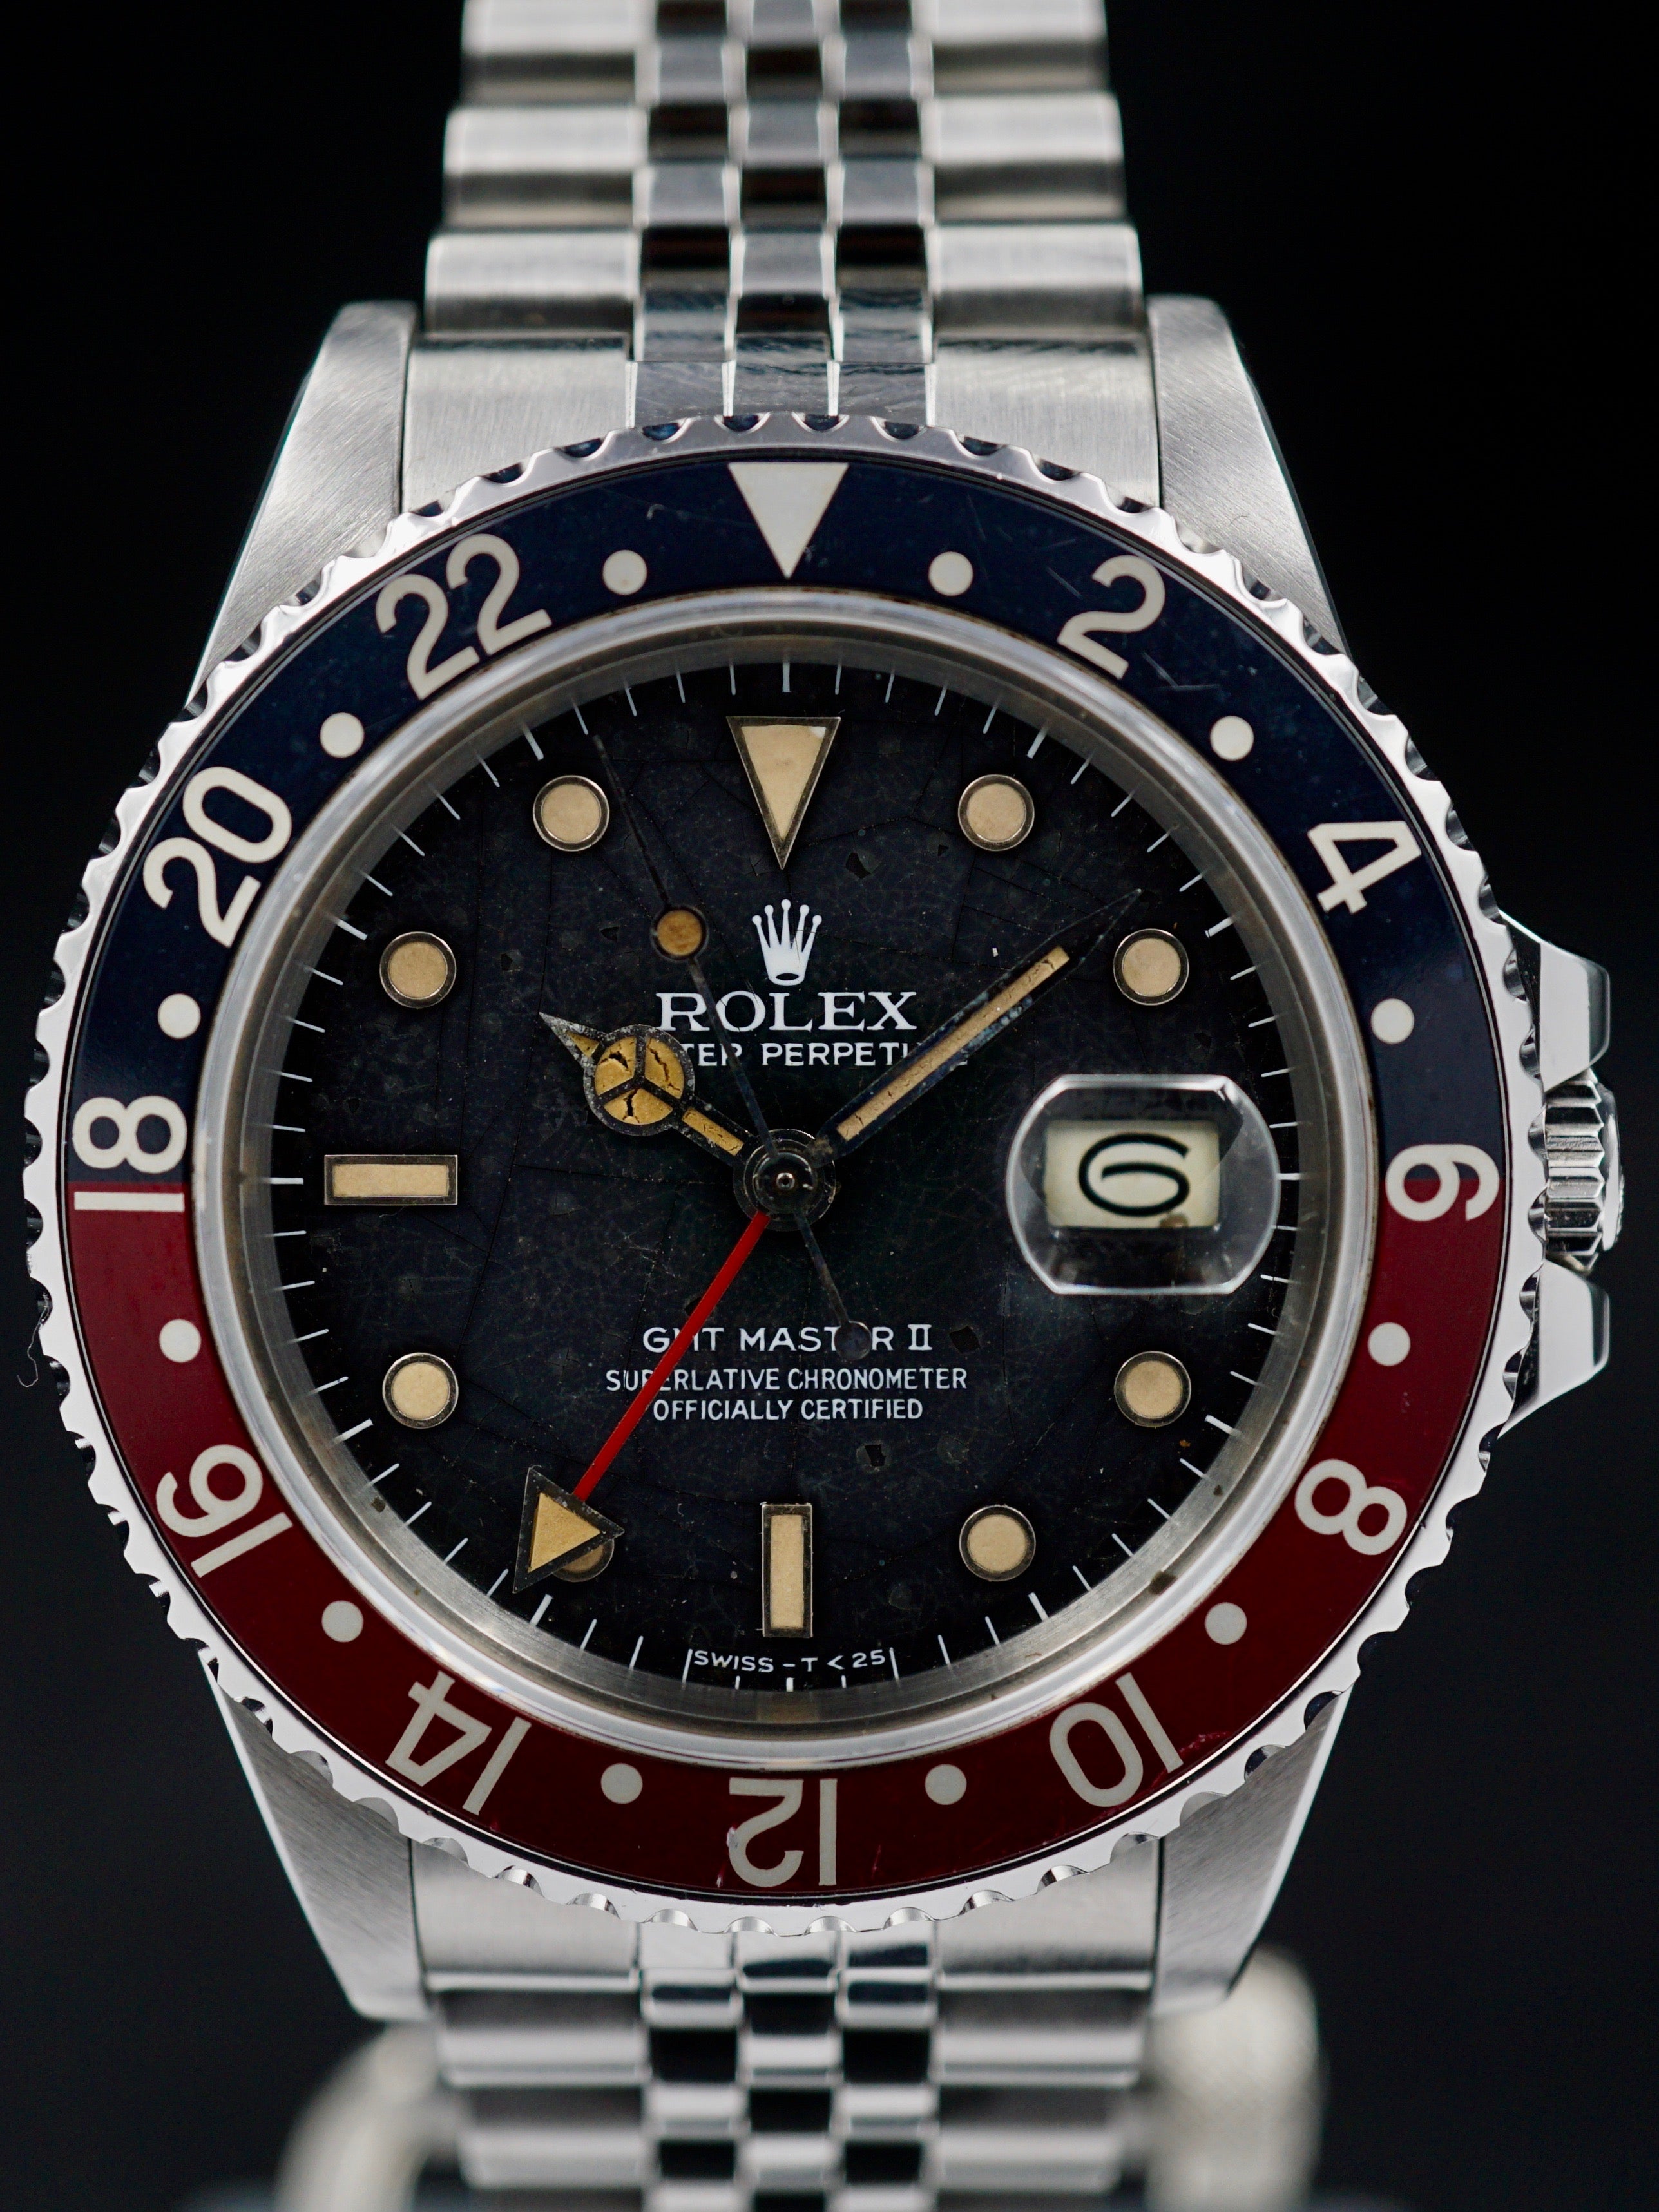 1984 Rolex GMT Master II (Ref. 16760) "Fat Lady Tropical Spider Dial"